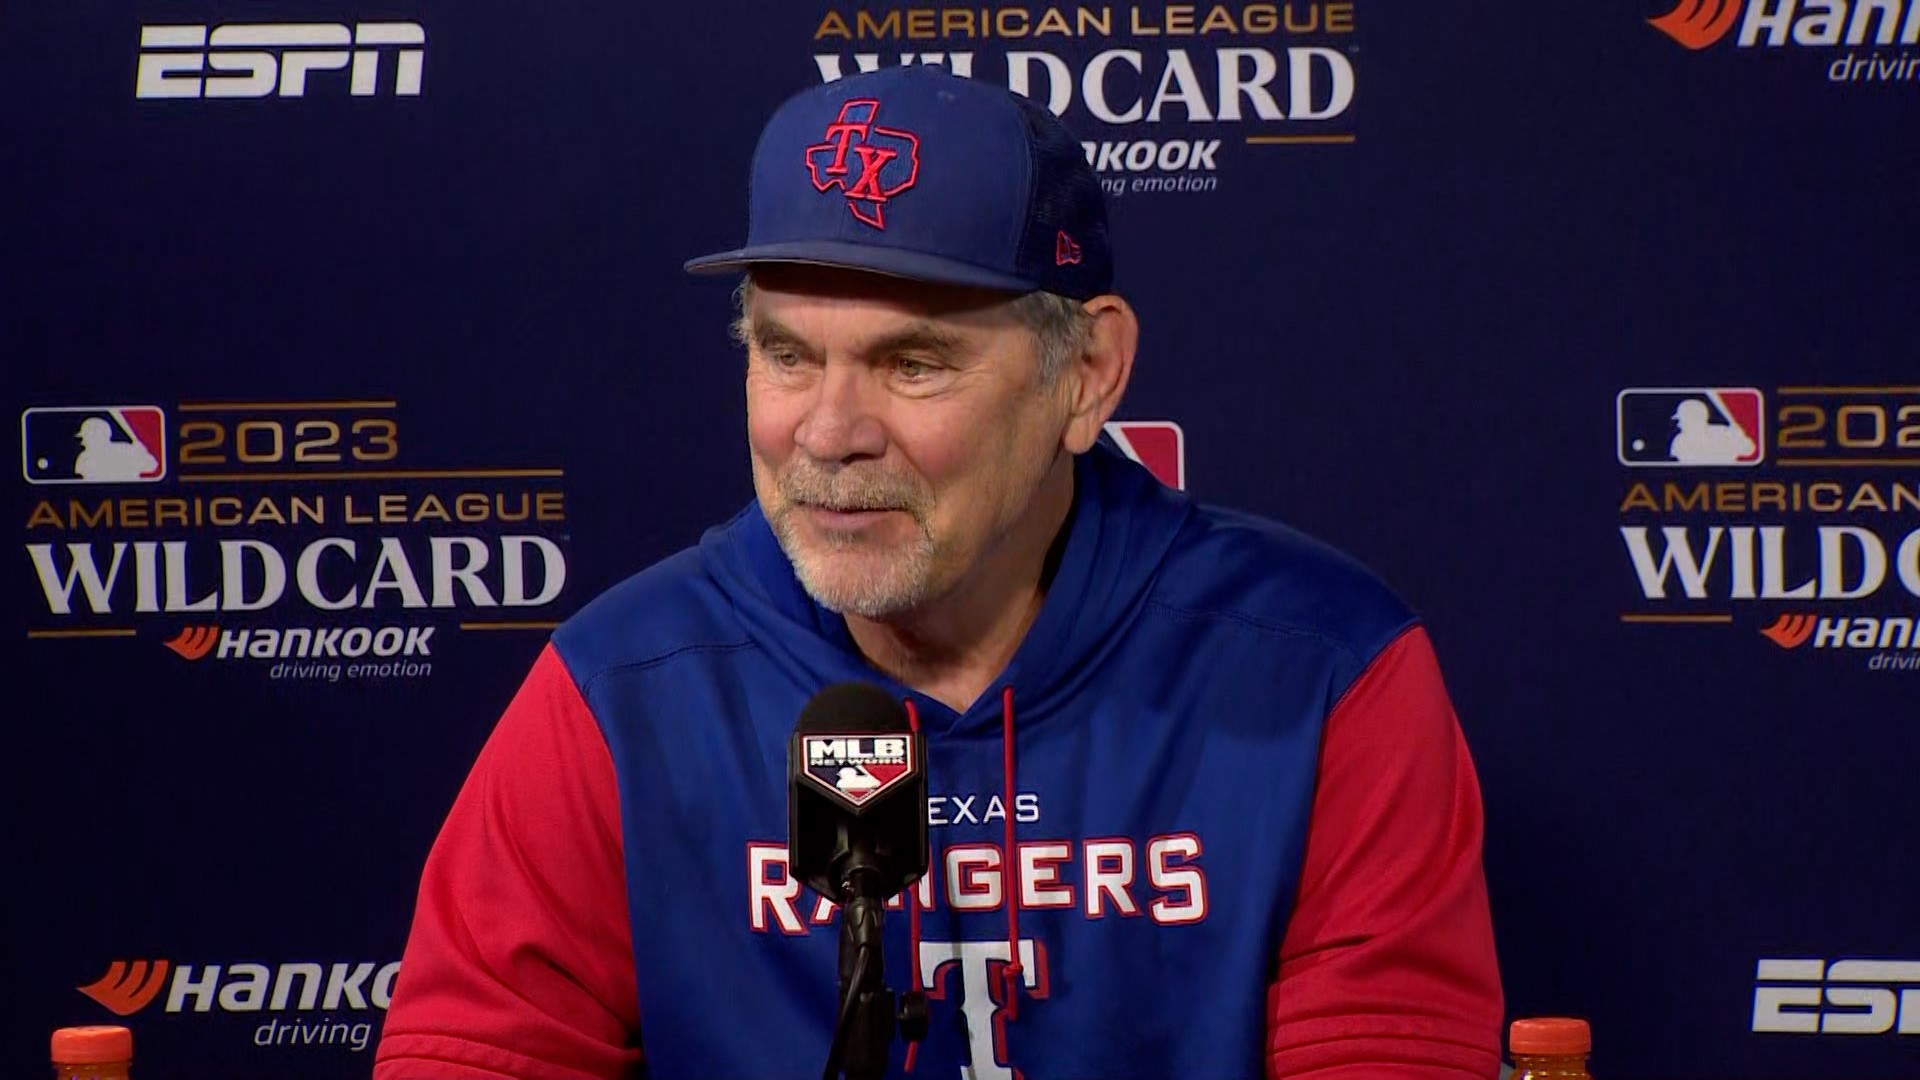 Texas Rangers manager Bruce Bochy met with the media before Game 1 of the AL Wild Card series Tuesday.